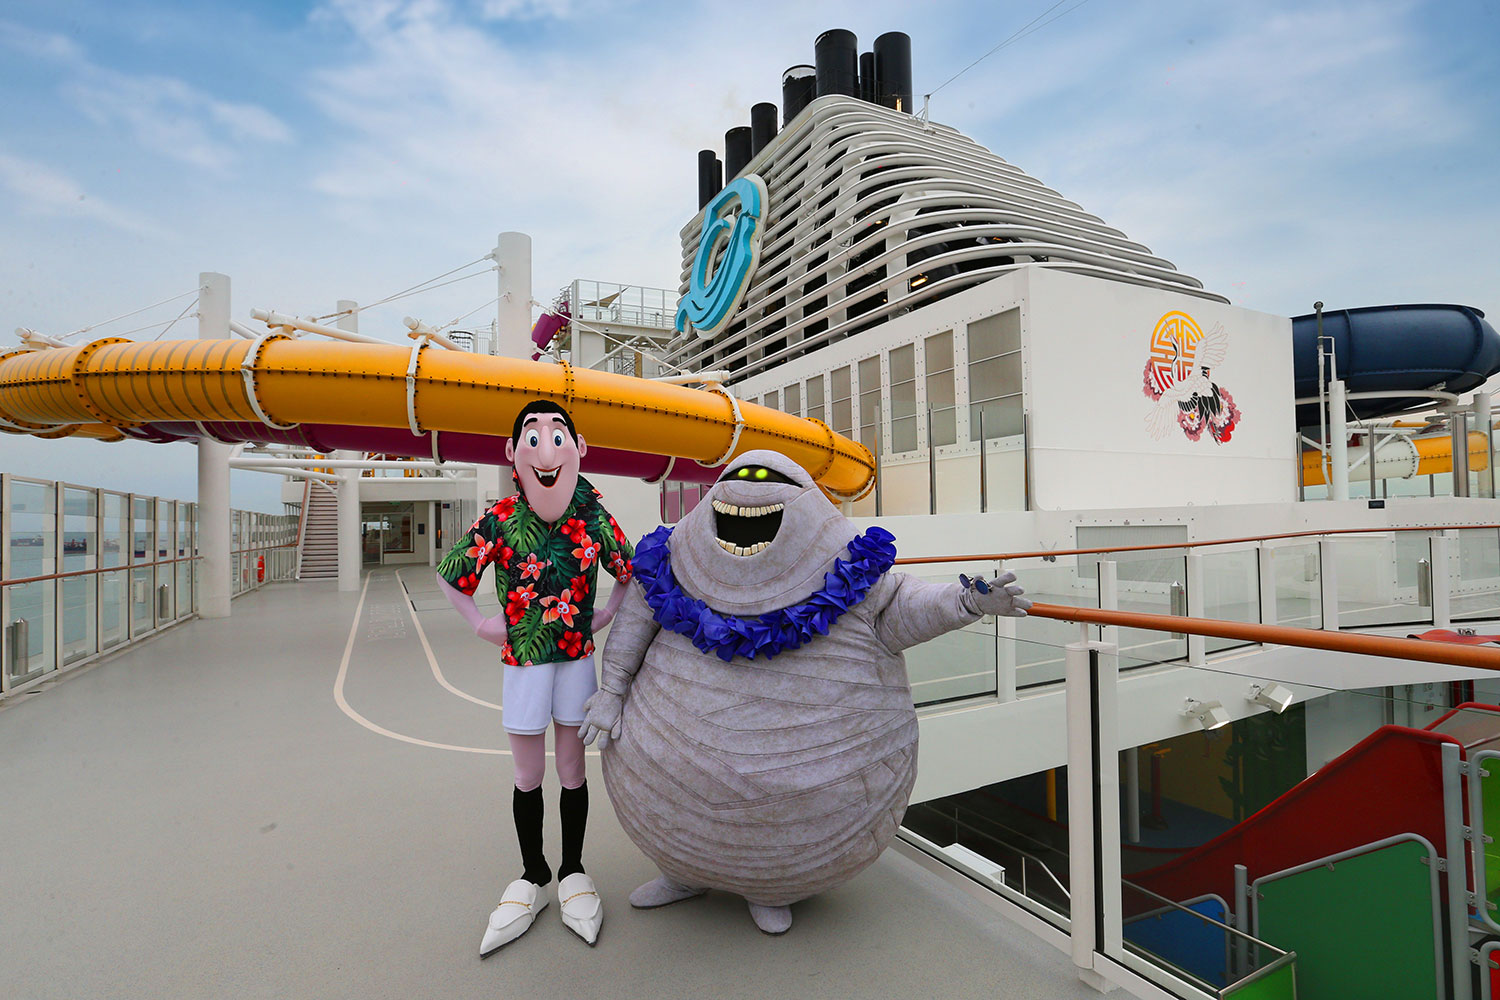 Go on a Monster Vacation with the Characters of Hotel Transylvania 3 onboard Dream Cruises